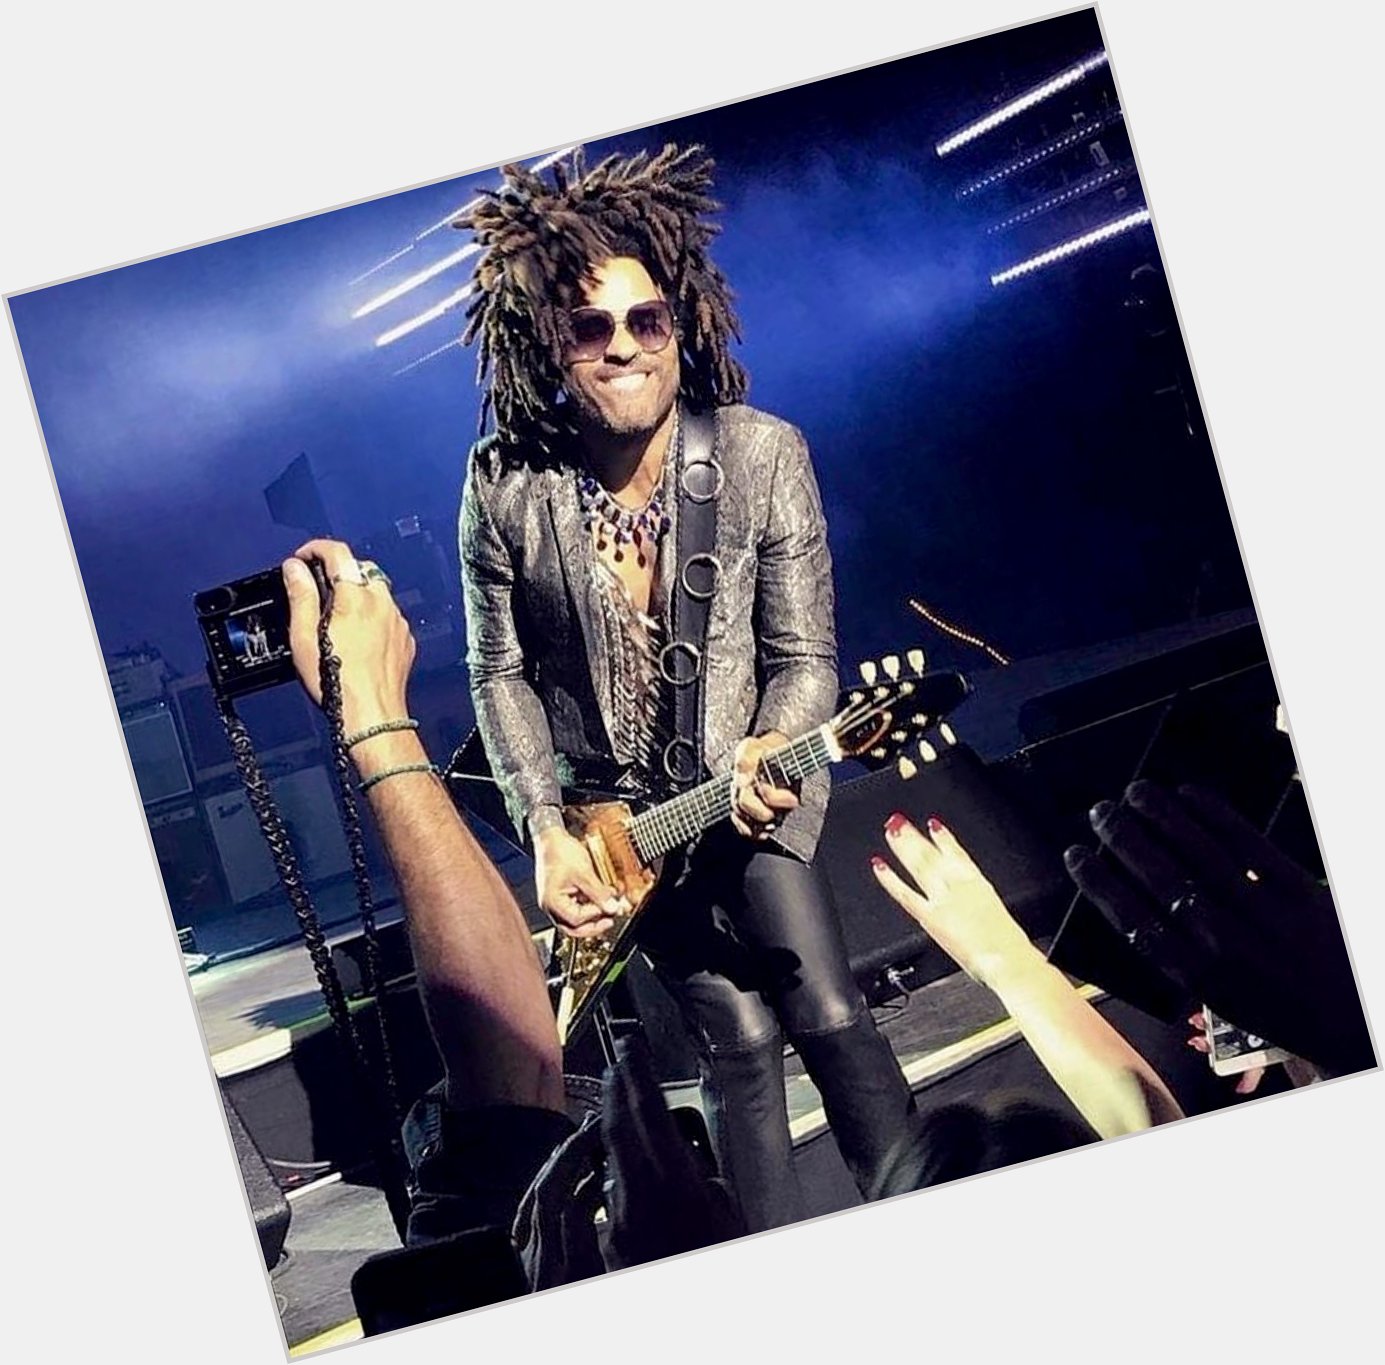 Happy 56th Birthday to Lenny Kravitz,  one of the most talented musicians ever & a huge influence.   